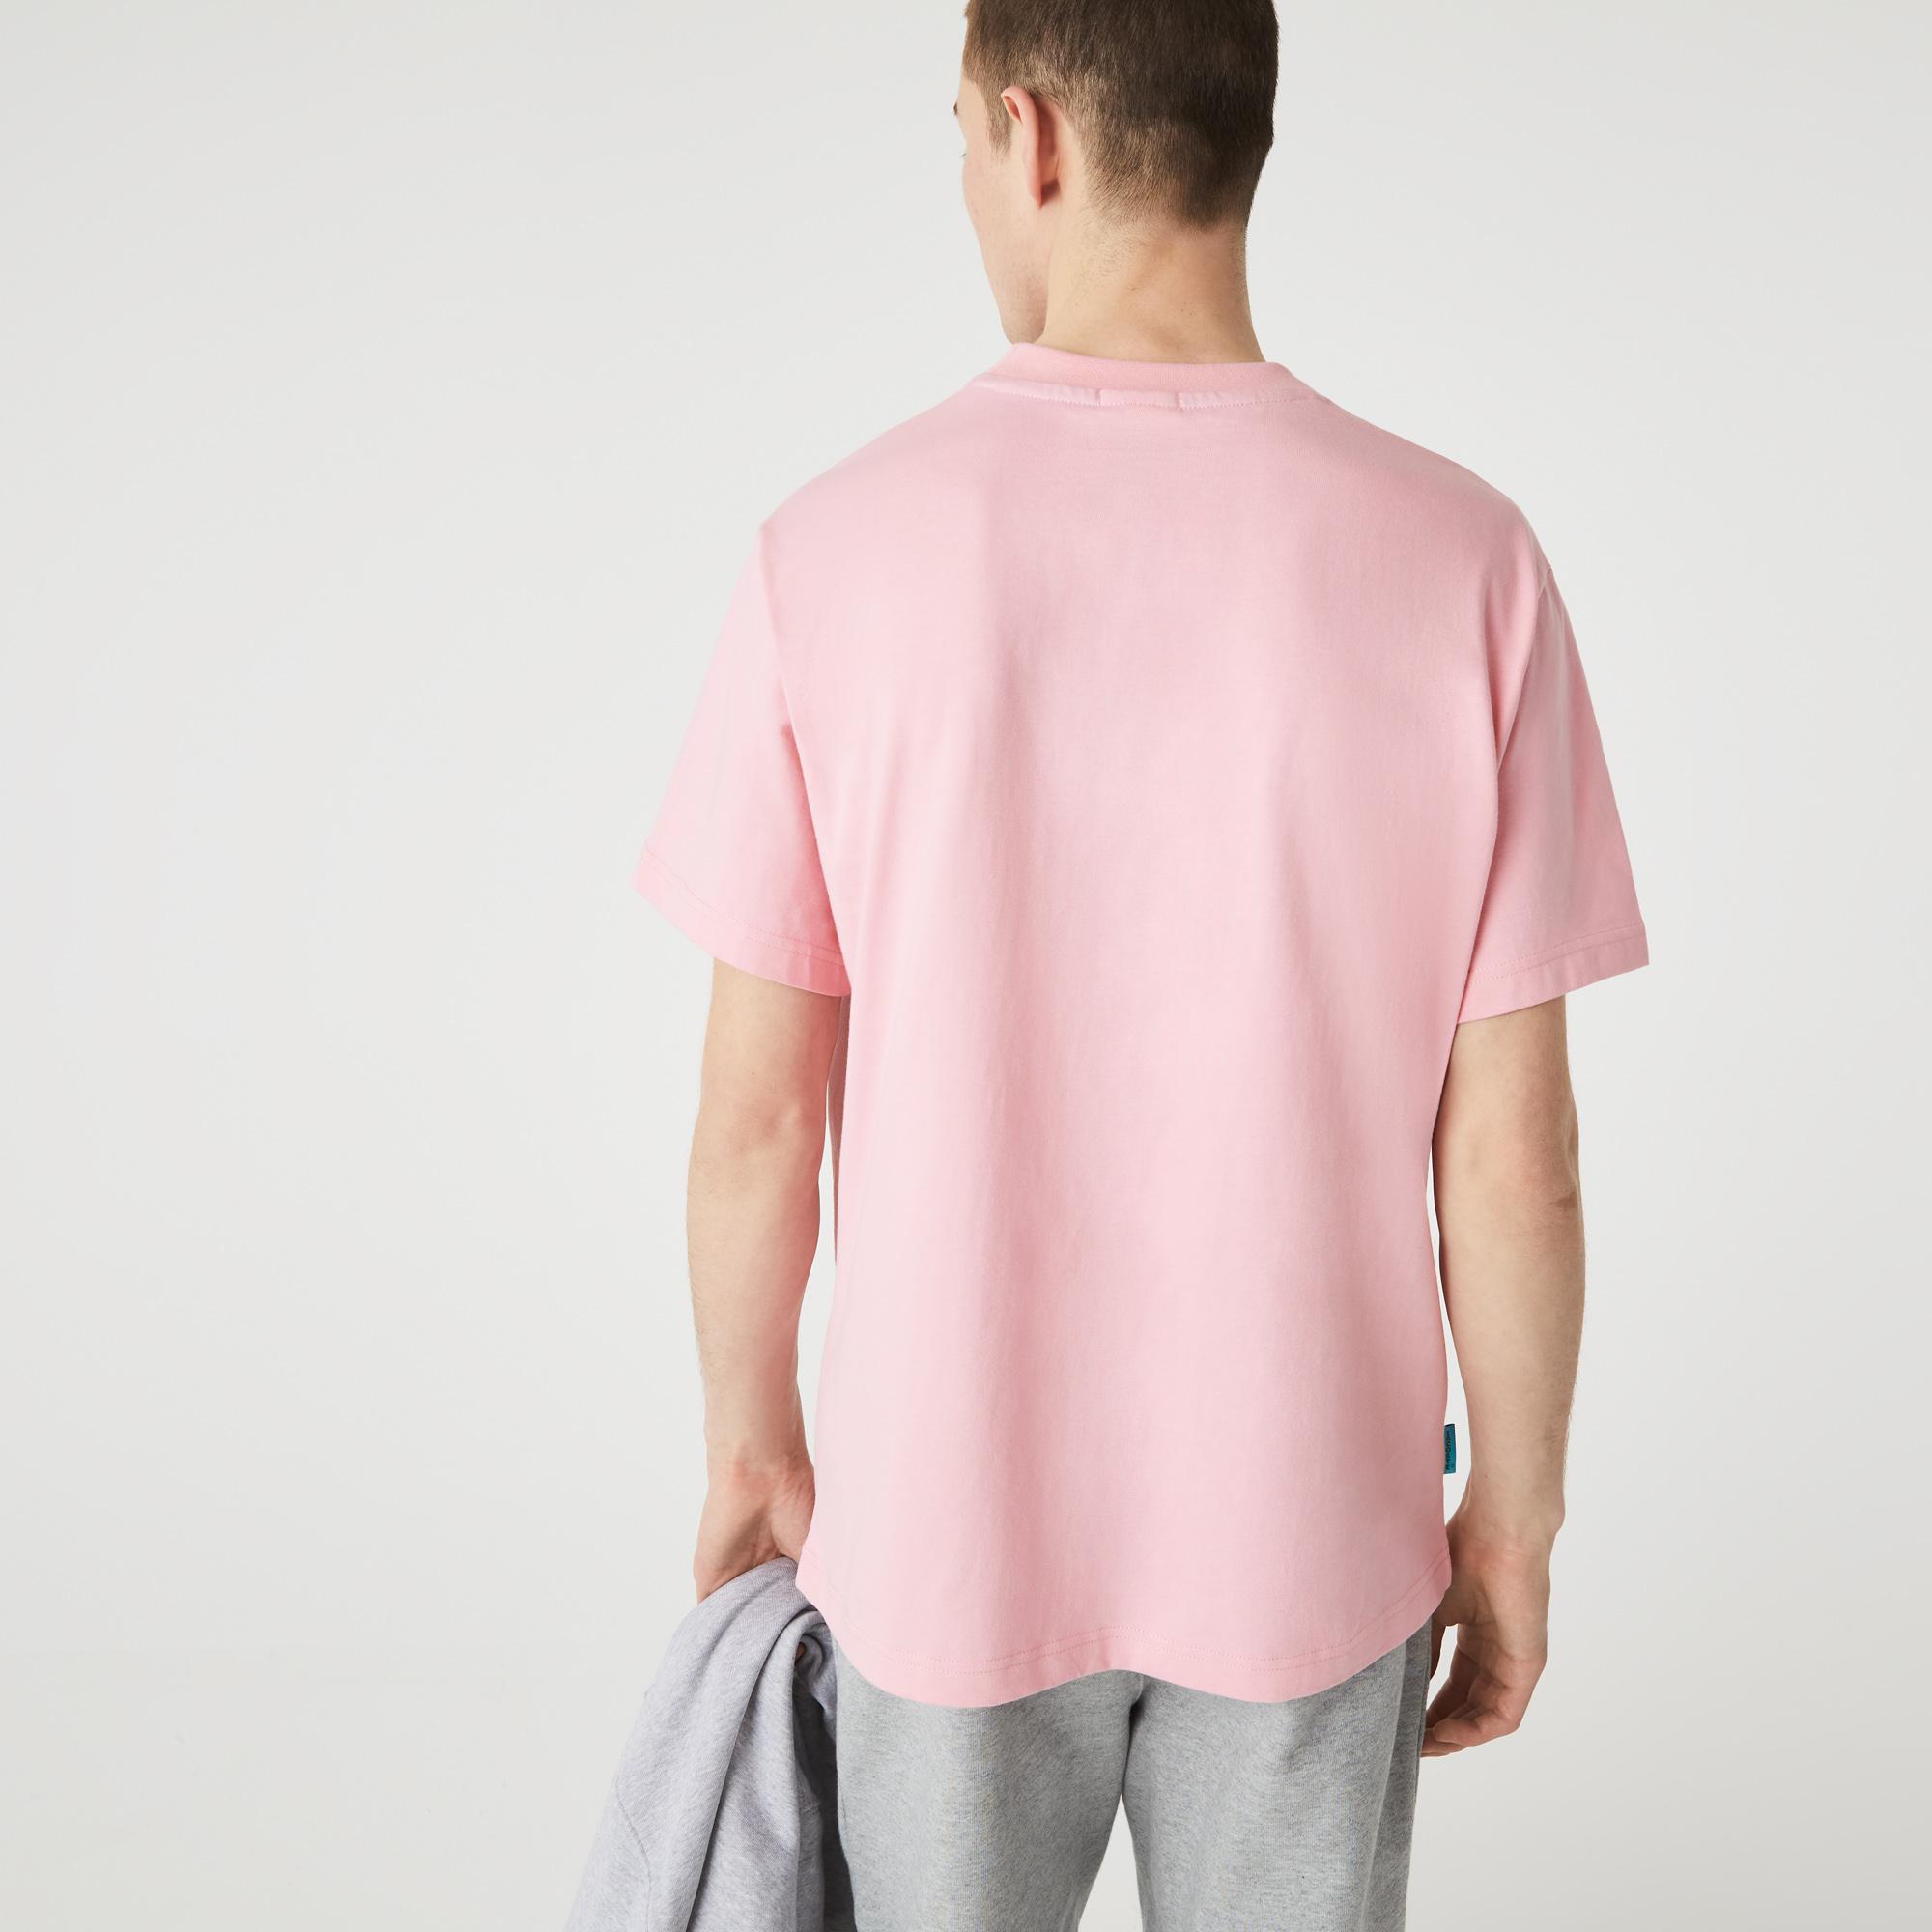 Lacoste L!VE Unisex Relaxed Fit Bisiklet Yaka Pembe T-Shirt. 4